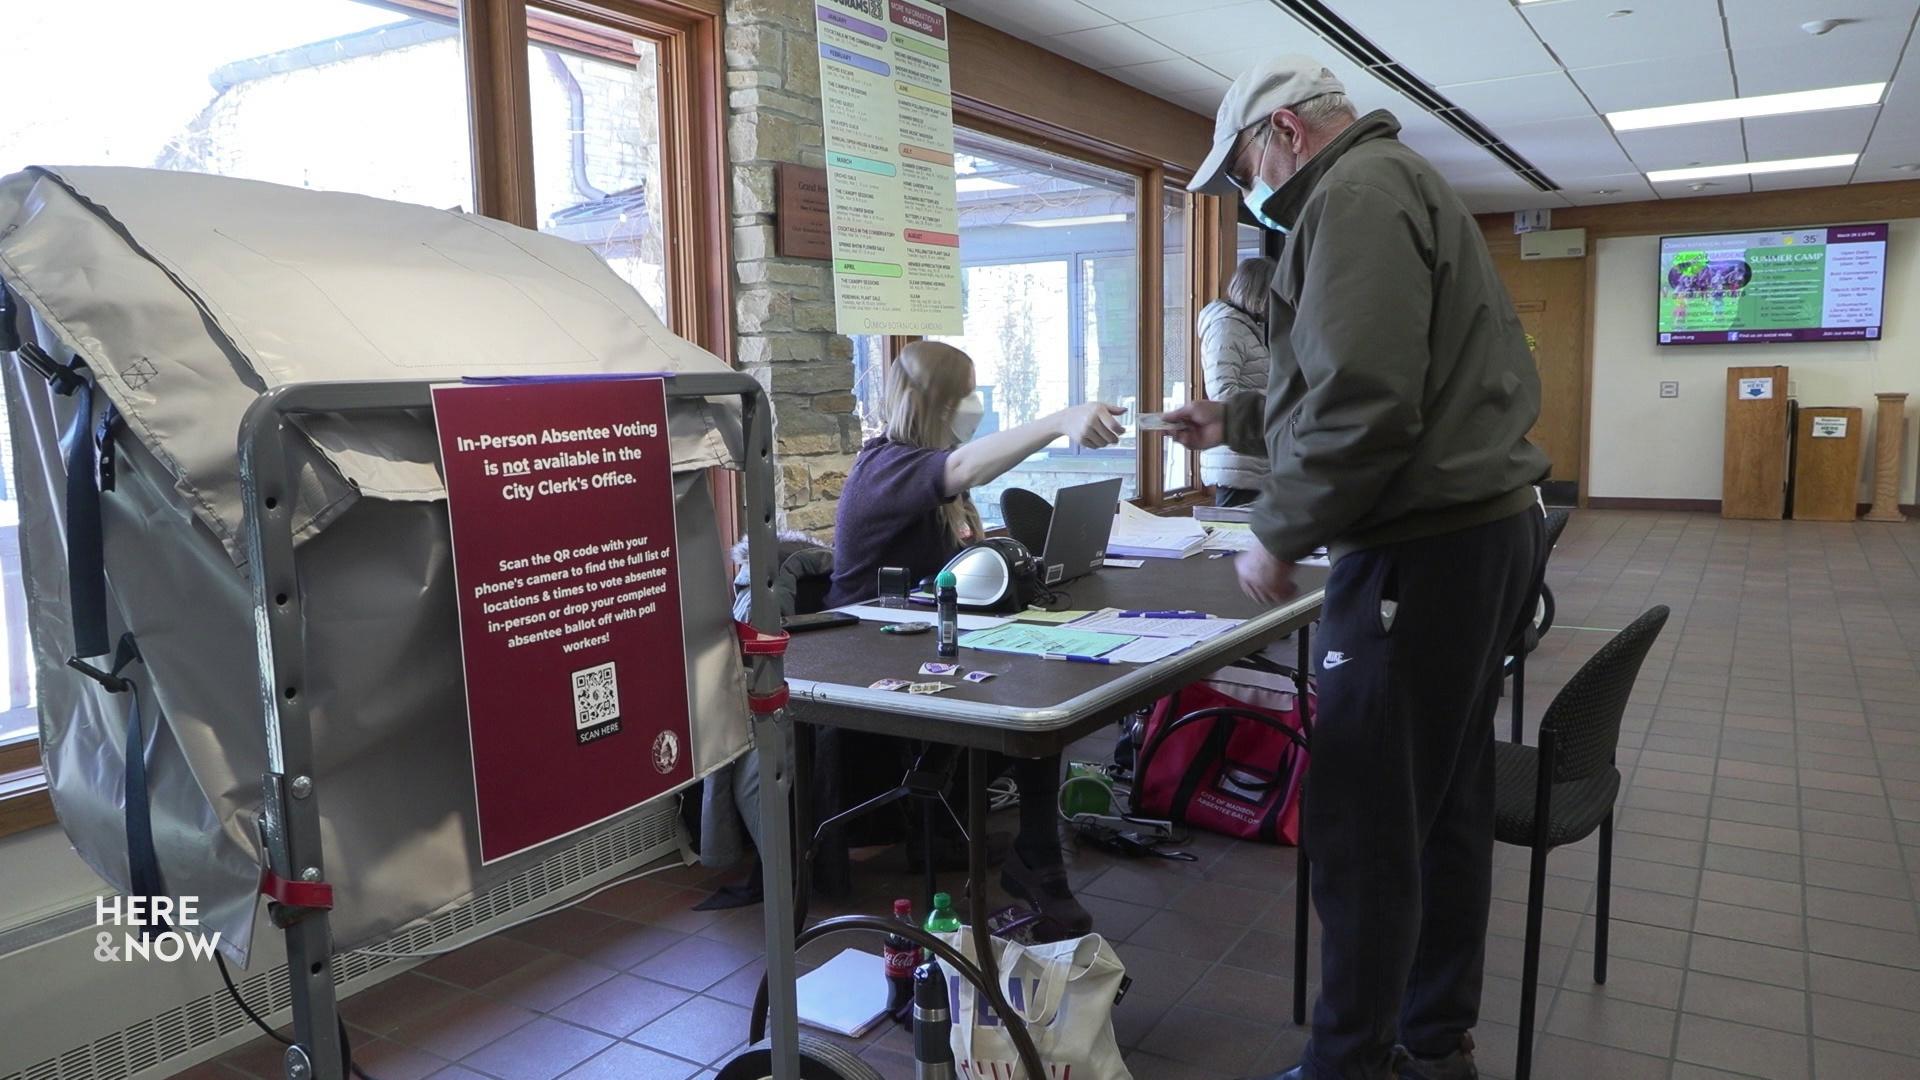 A still image from a video shows a man at a polling place speaking to a clerk with a voting machine to his left.